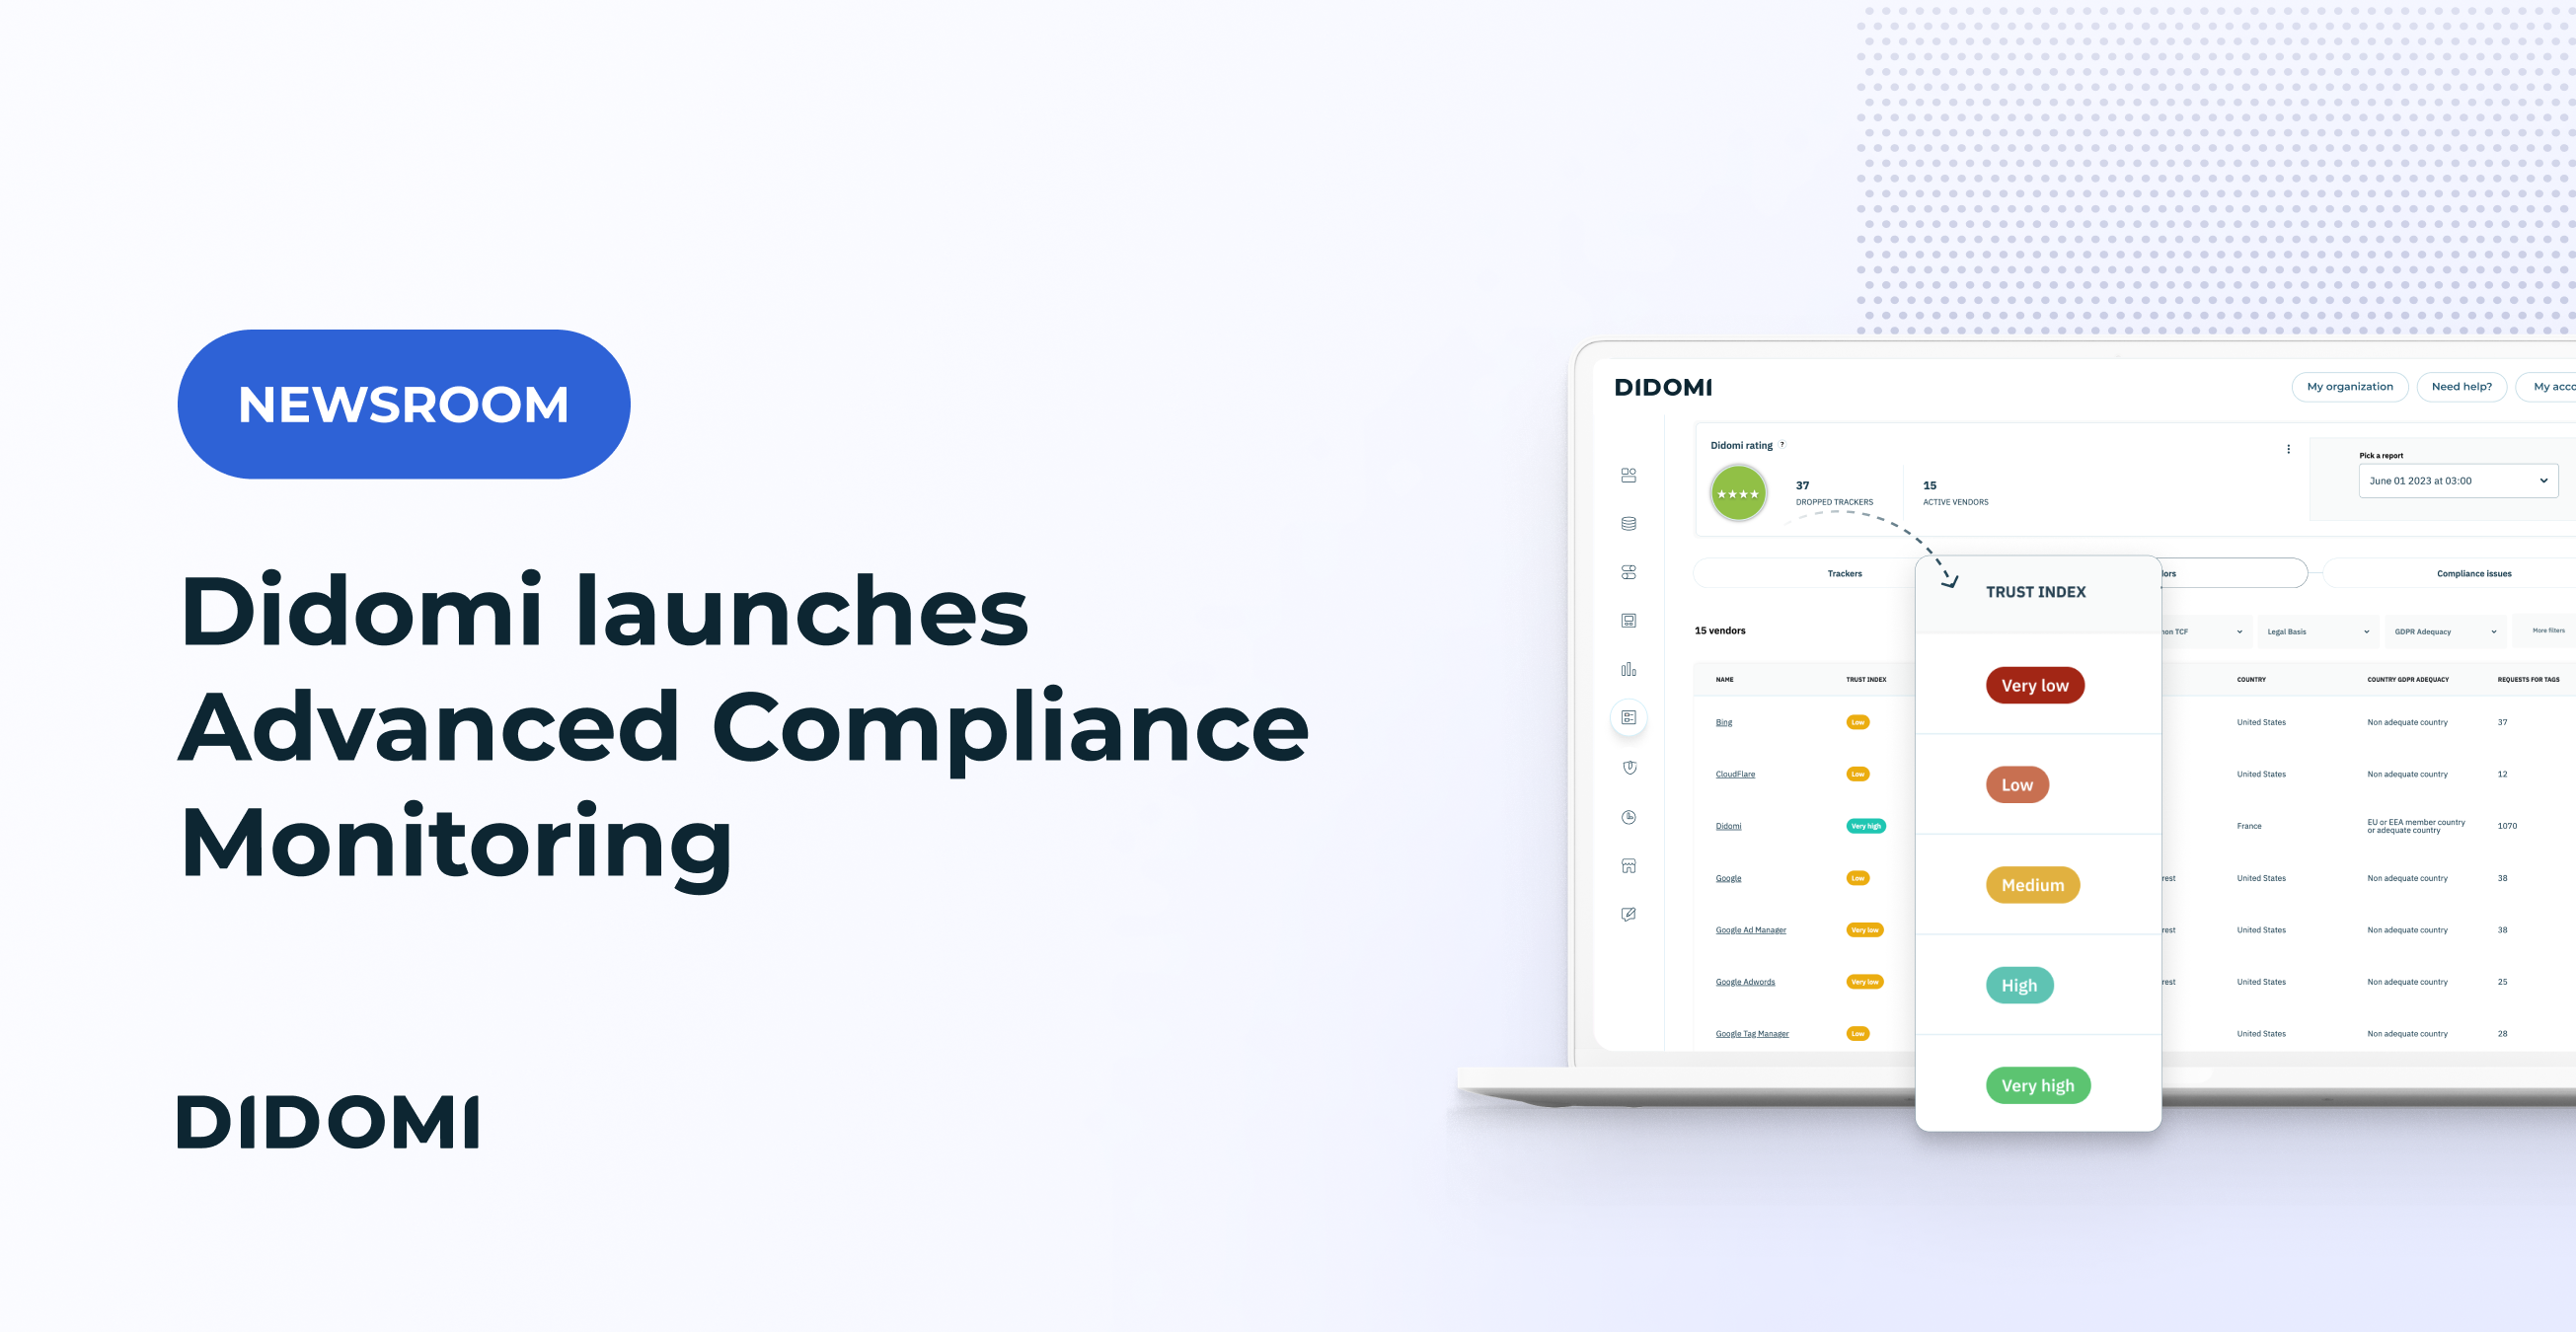 Didomi launches Advanced Compliance Monitoring to help organizations manage their vendor and tracker ecosystem